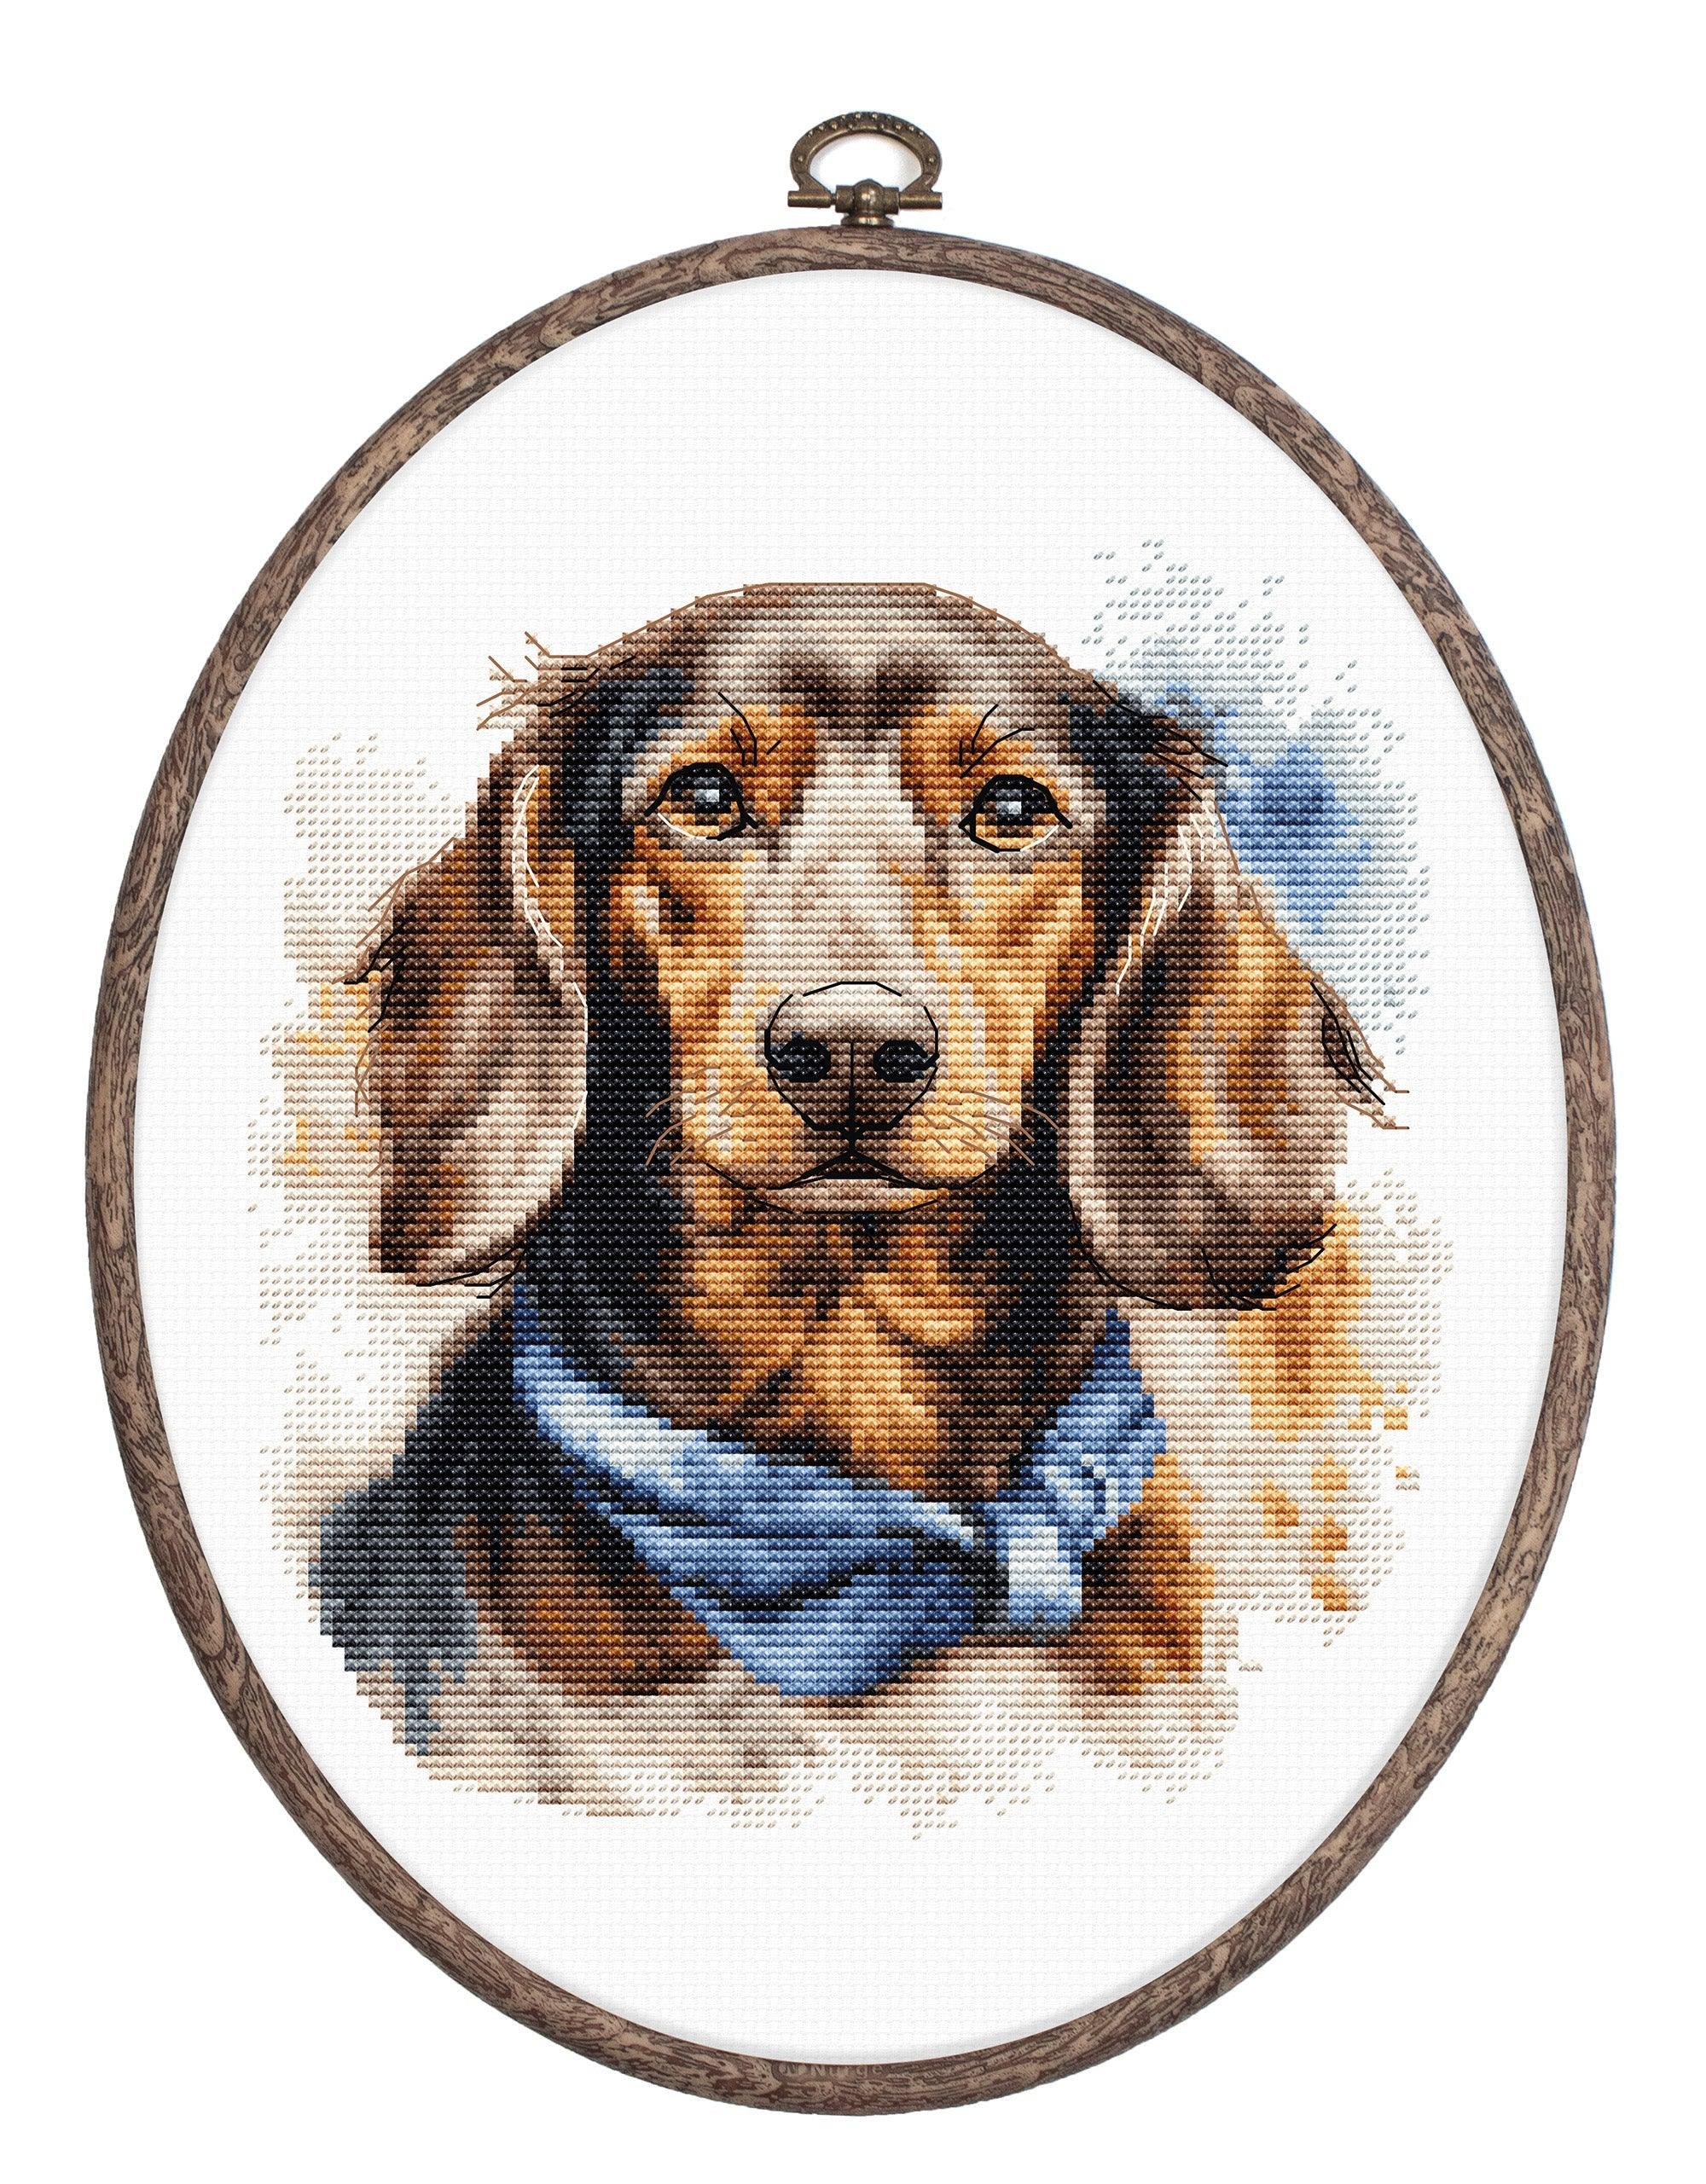 Cross Stitch Kit with Hoop Included Luca-S - The Dachshund, BC222 - Luca-S Counted Cross Stitch Kit